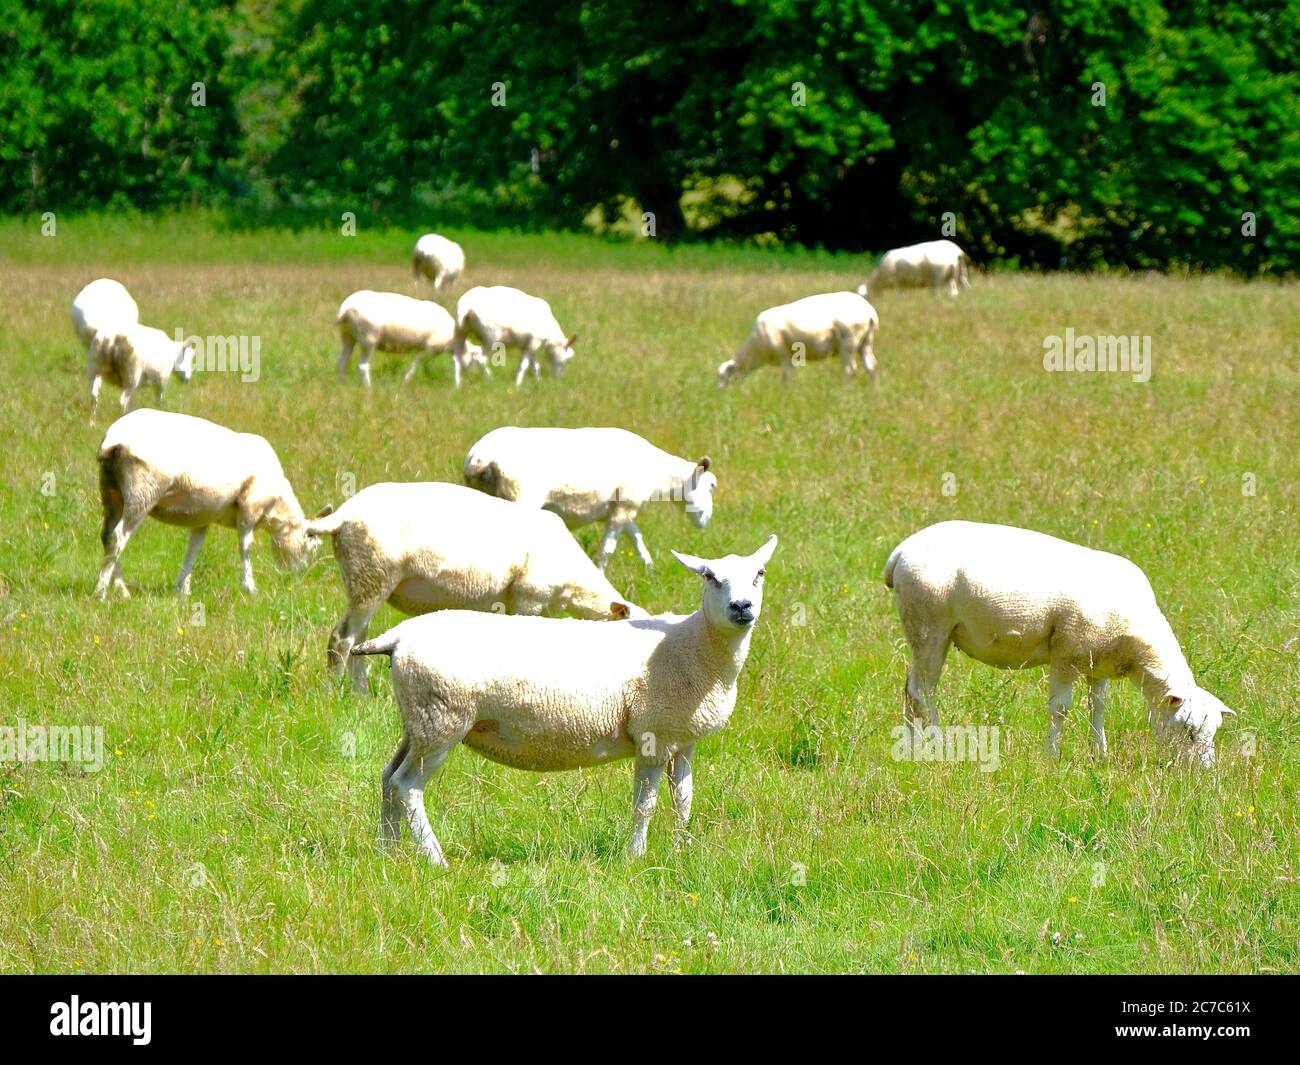 Newly sheared sheep grazing in a meadow Stock Photo